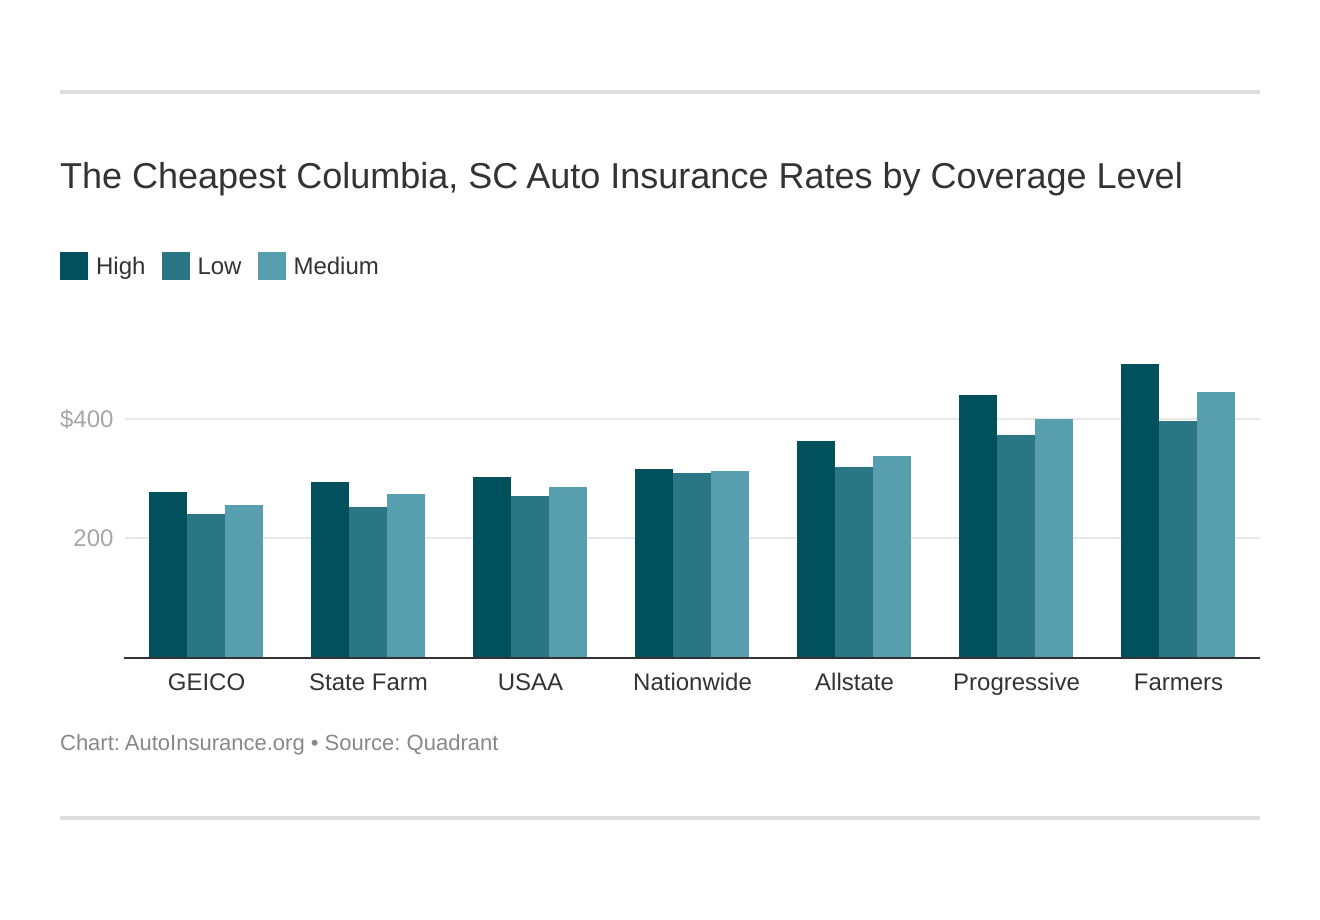 The Cheapest Columbia, SC Auto Insurance Rates by Coverage Level